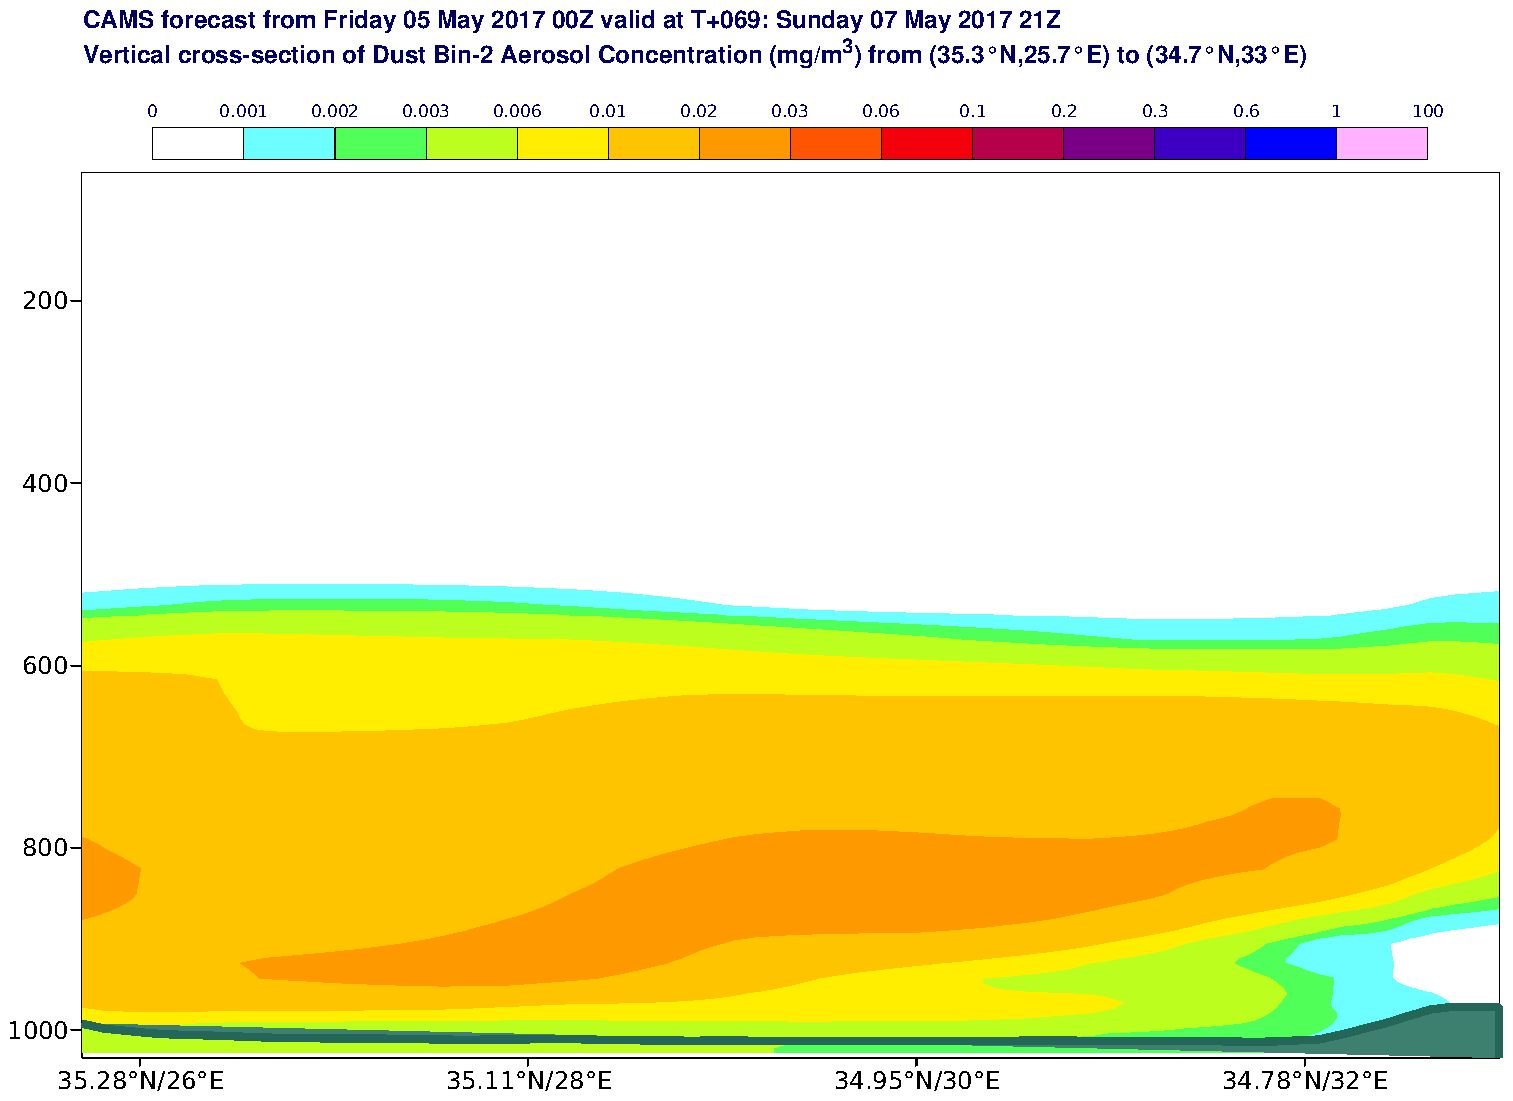 Vertical cross-section of Dust Bin-2 Aerosol Concentration (mg/m3) valid at T69 - 2017-05-07 21:00